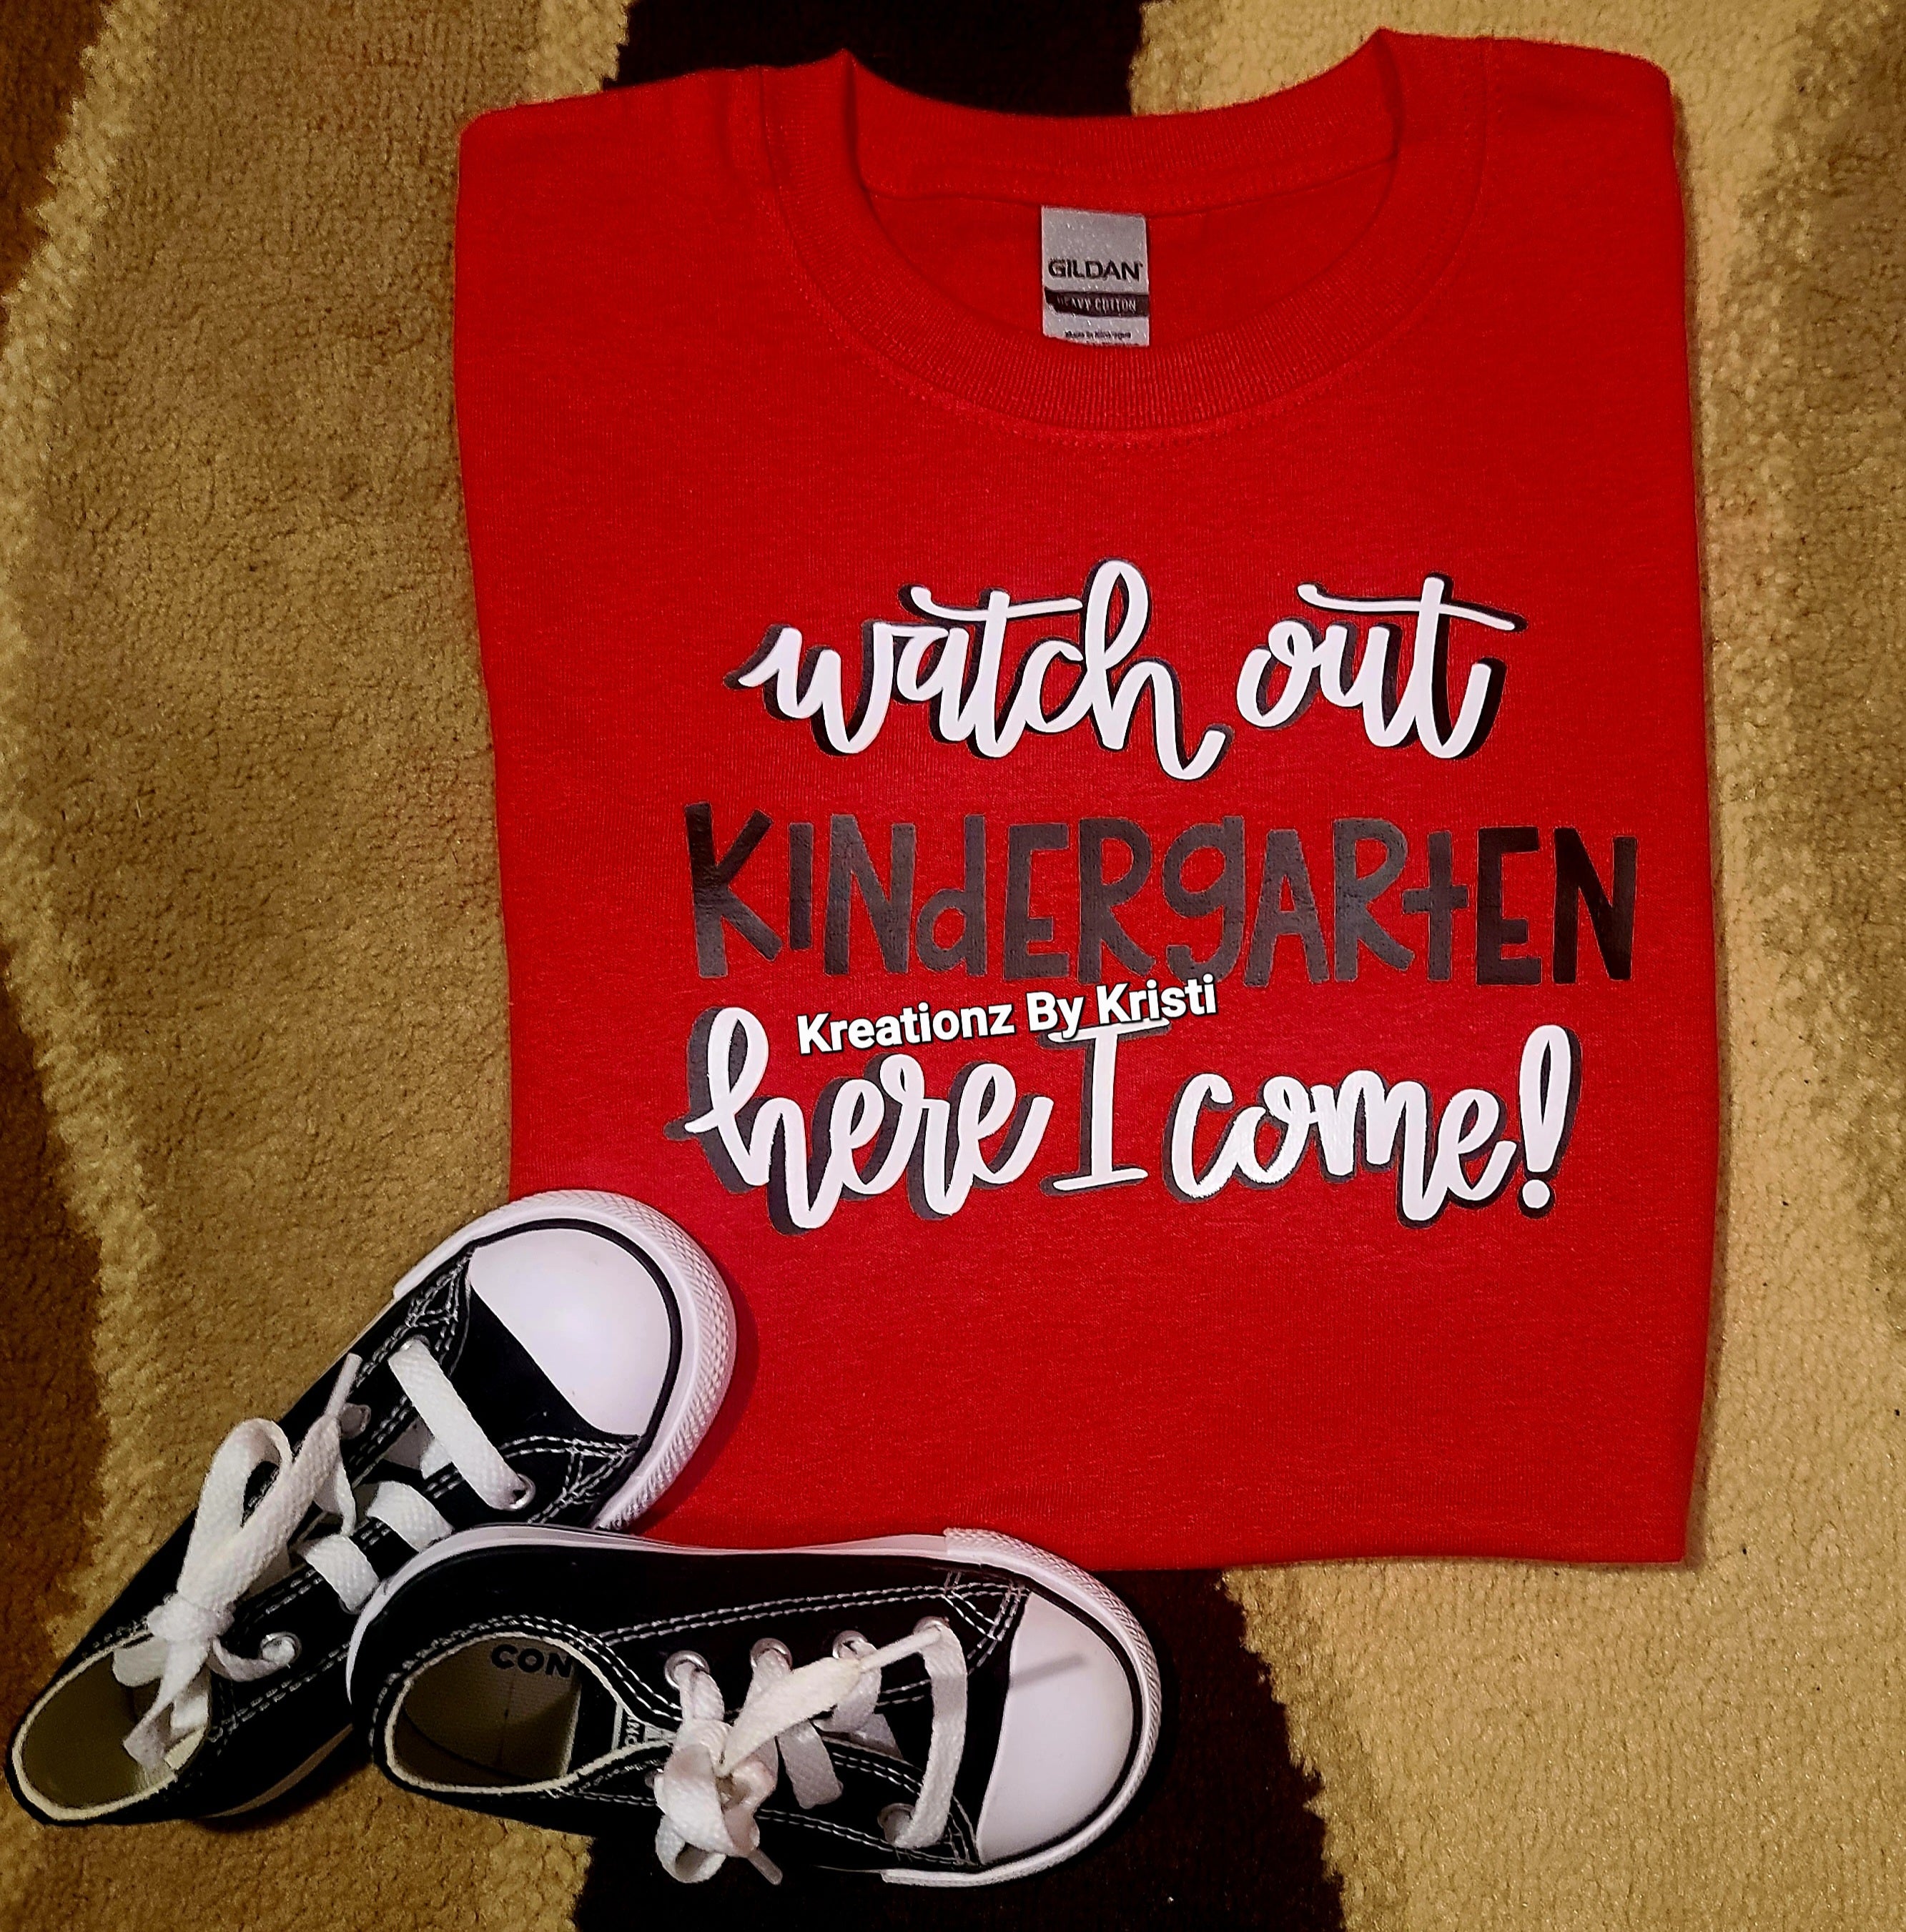 Custom Watch Out Kindergarten here I come shirt - Bleached Tees - Sweatshirts - Sublimination T-Shirts